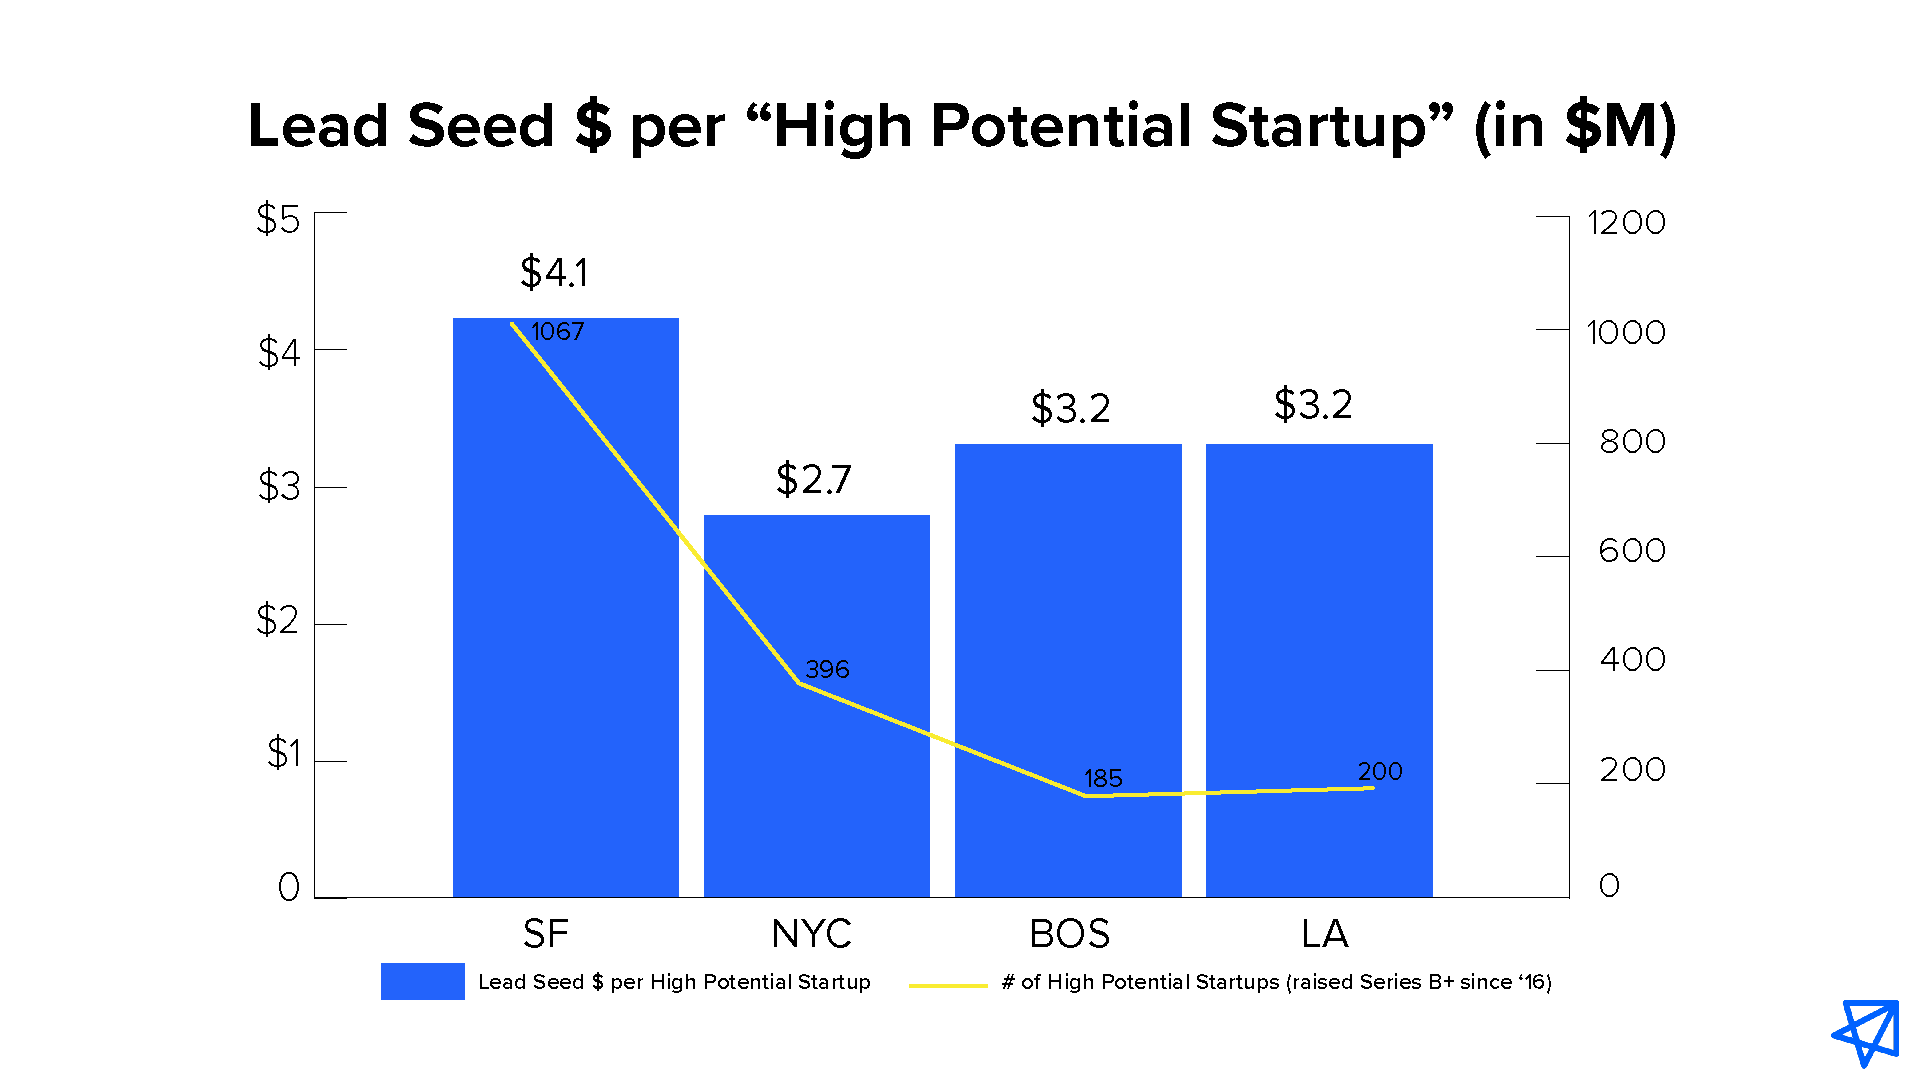 Lead Seed $ per "High Potential Startup" (in $M)